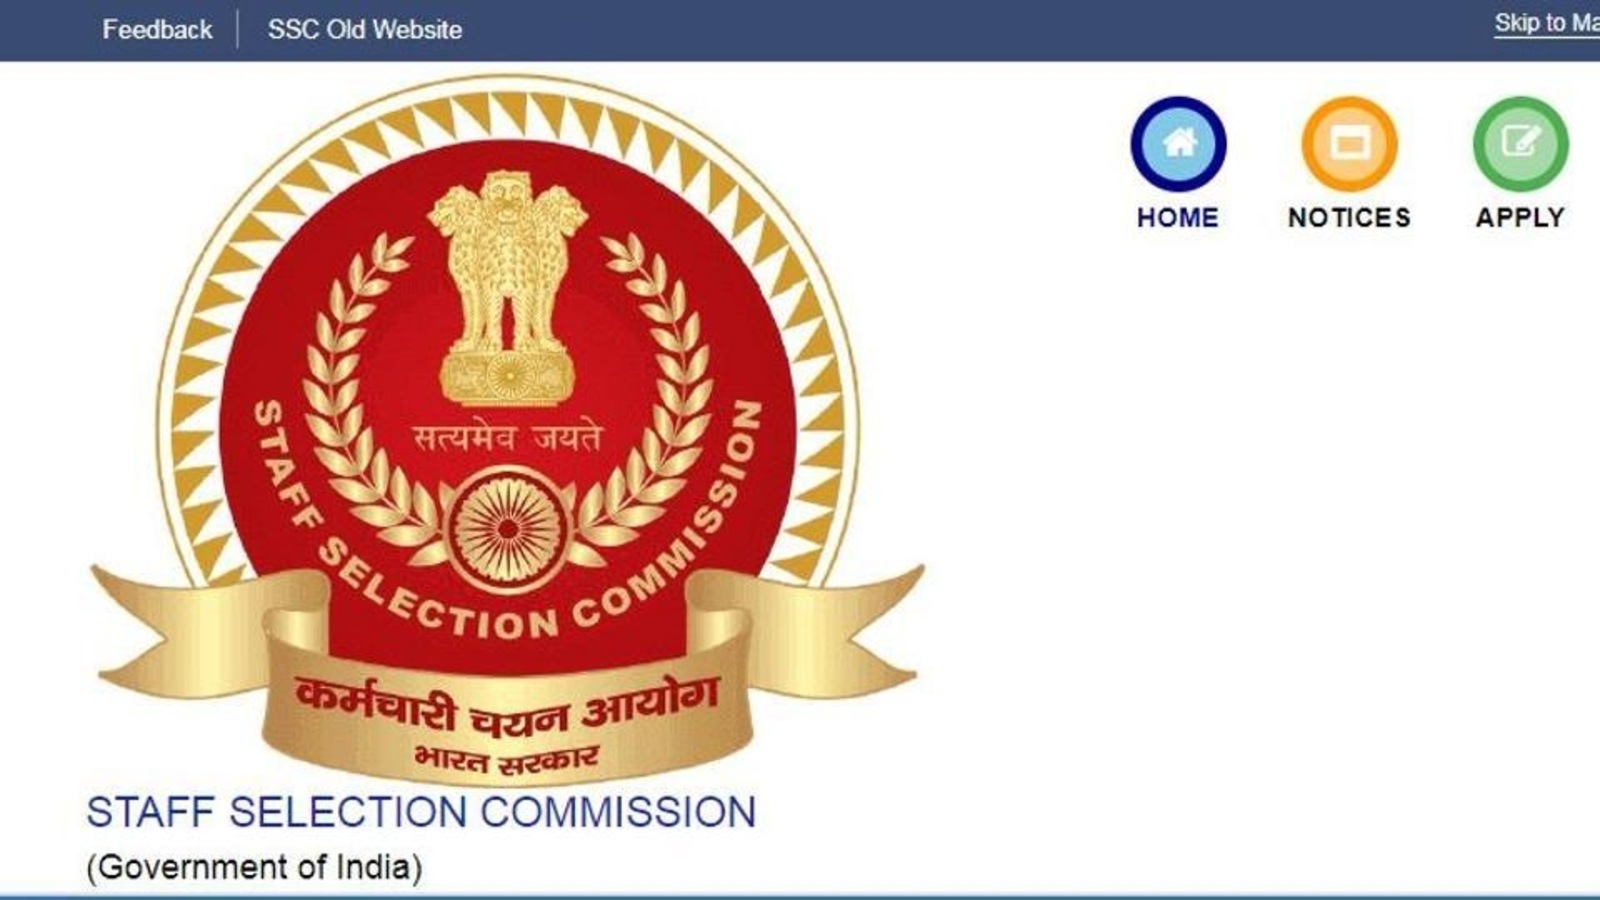 SSC CHSL 2020 exam date released at ssc.nic.in, check notification here